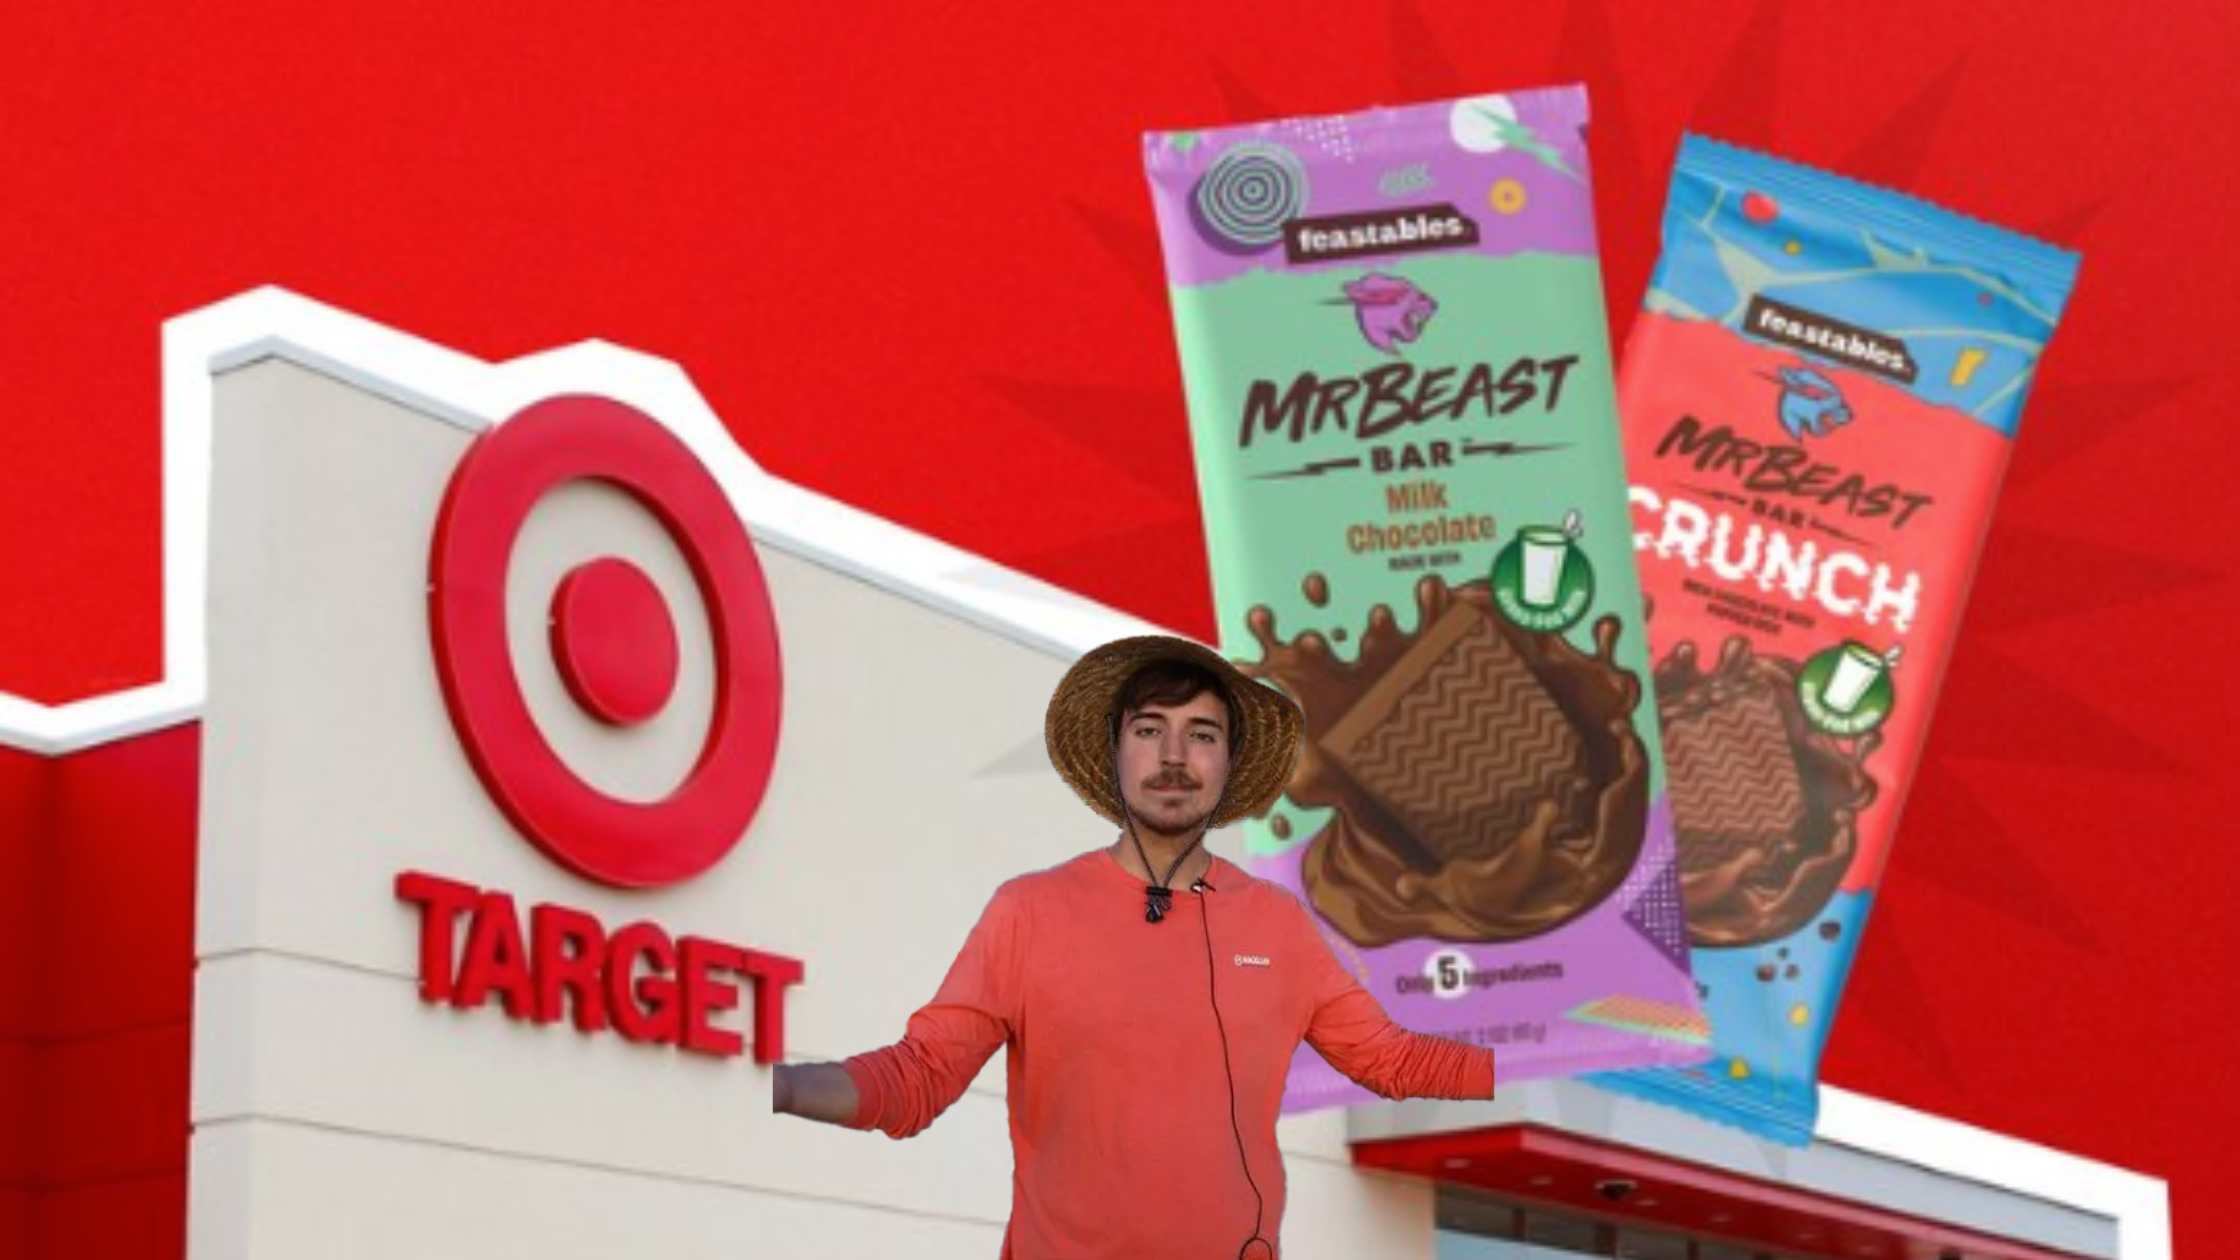 MrBeast's Feastables Now Accessible at TARGET, Fans React!